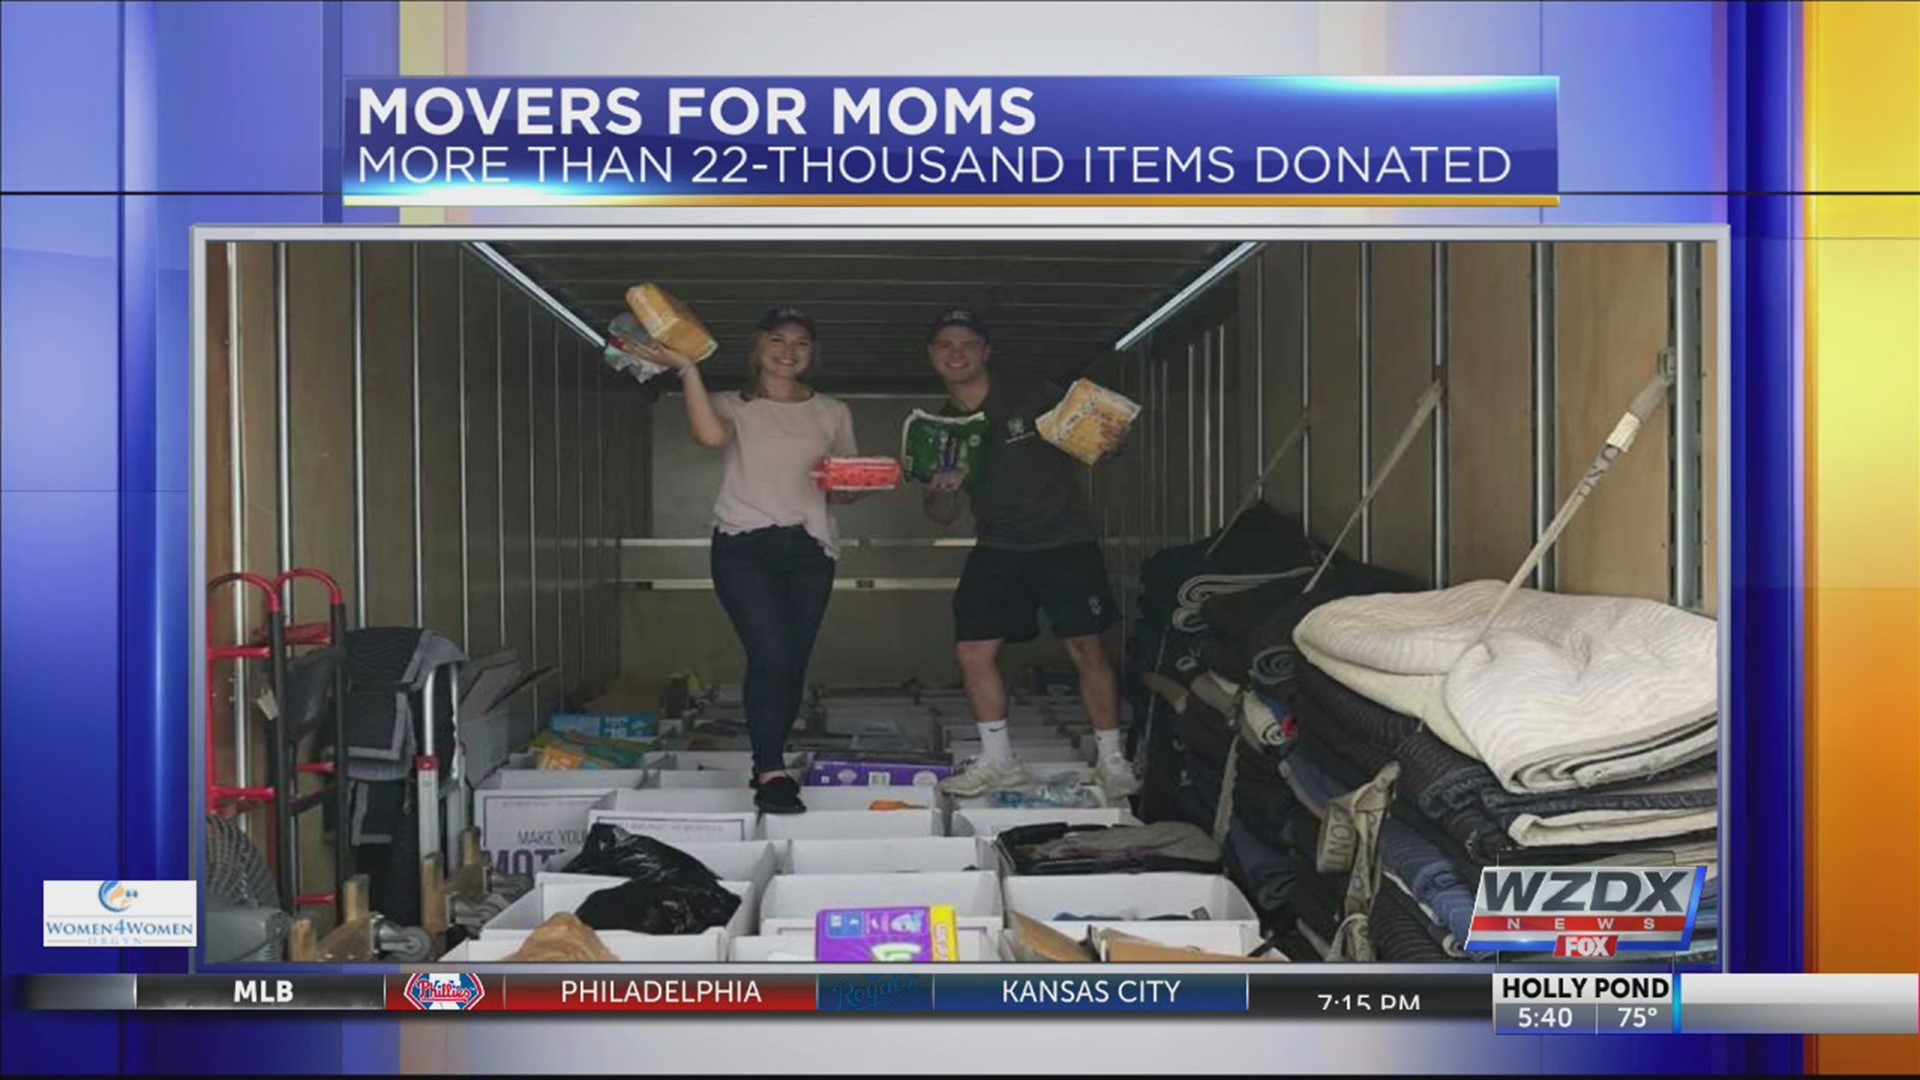 For the past two months, Two Men and a Truck have been collecting donations for moms living in domestic abuse or homeless shelters.